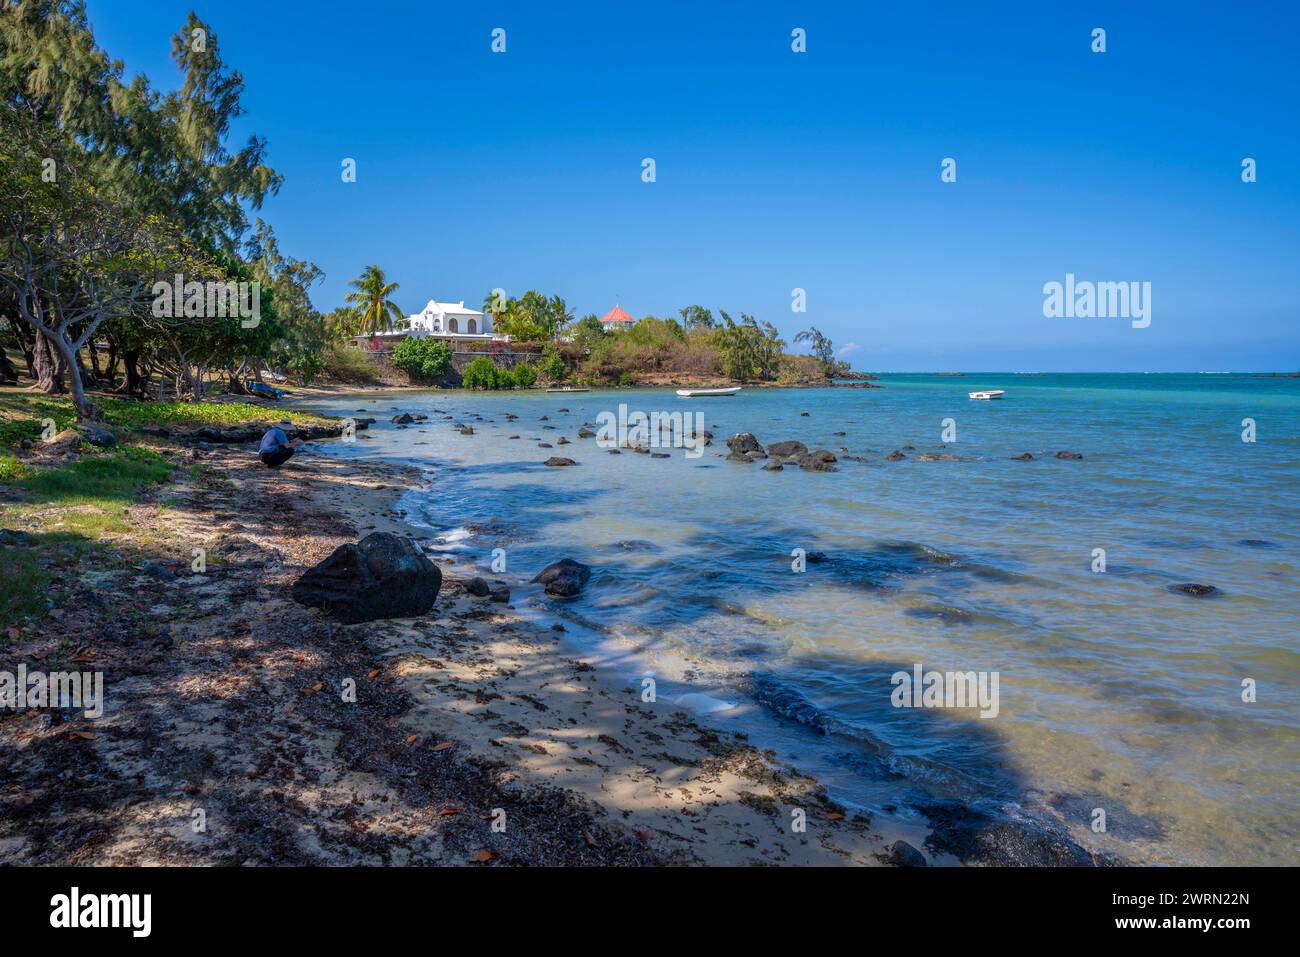 View of Anse La Raie Beach and turquoise Indian Ocean on sunny day, Mauritius, Indian Ocean, Africa Copyright: FrankxFell 844-32232 Stock Photo